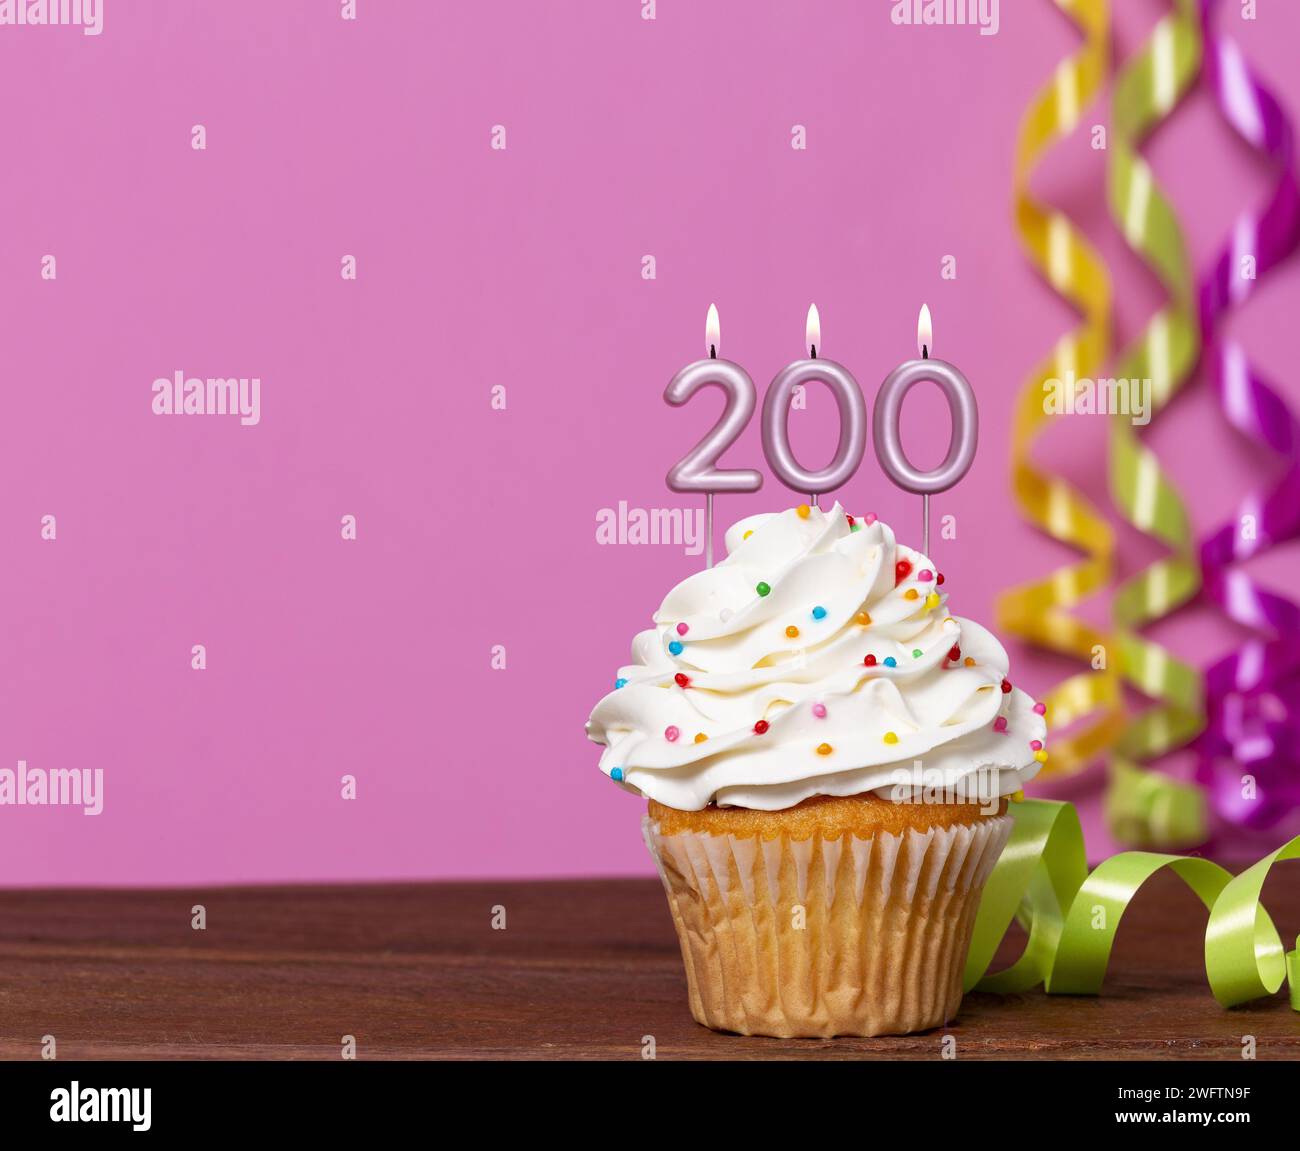 Birthday Cake With Candle Number 200 - On Pink Background. Stock Photo